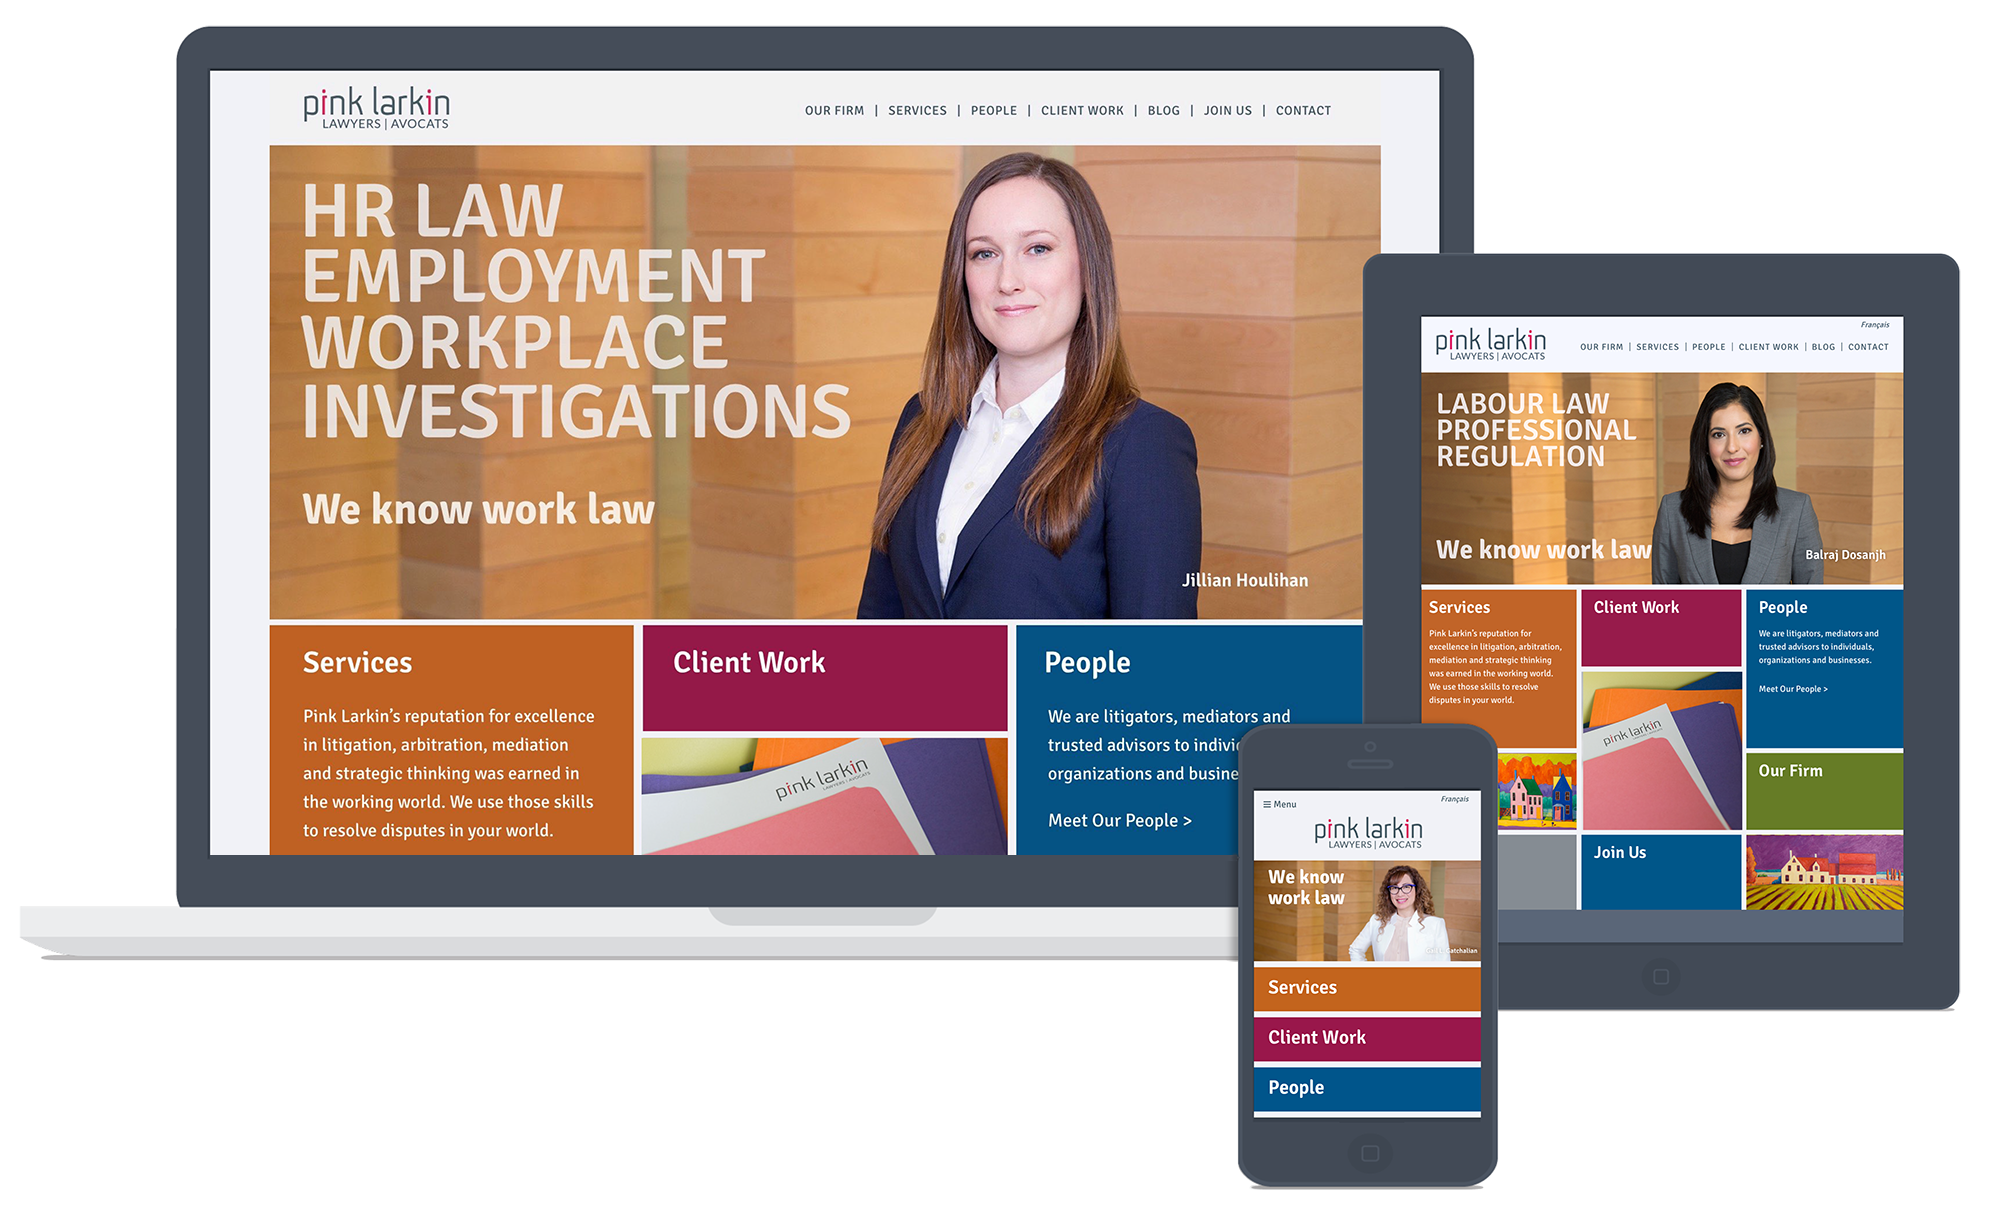 A picture of a Law Firm Website Design shown as an example. 